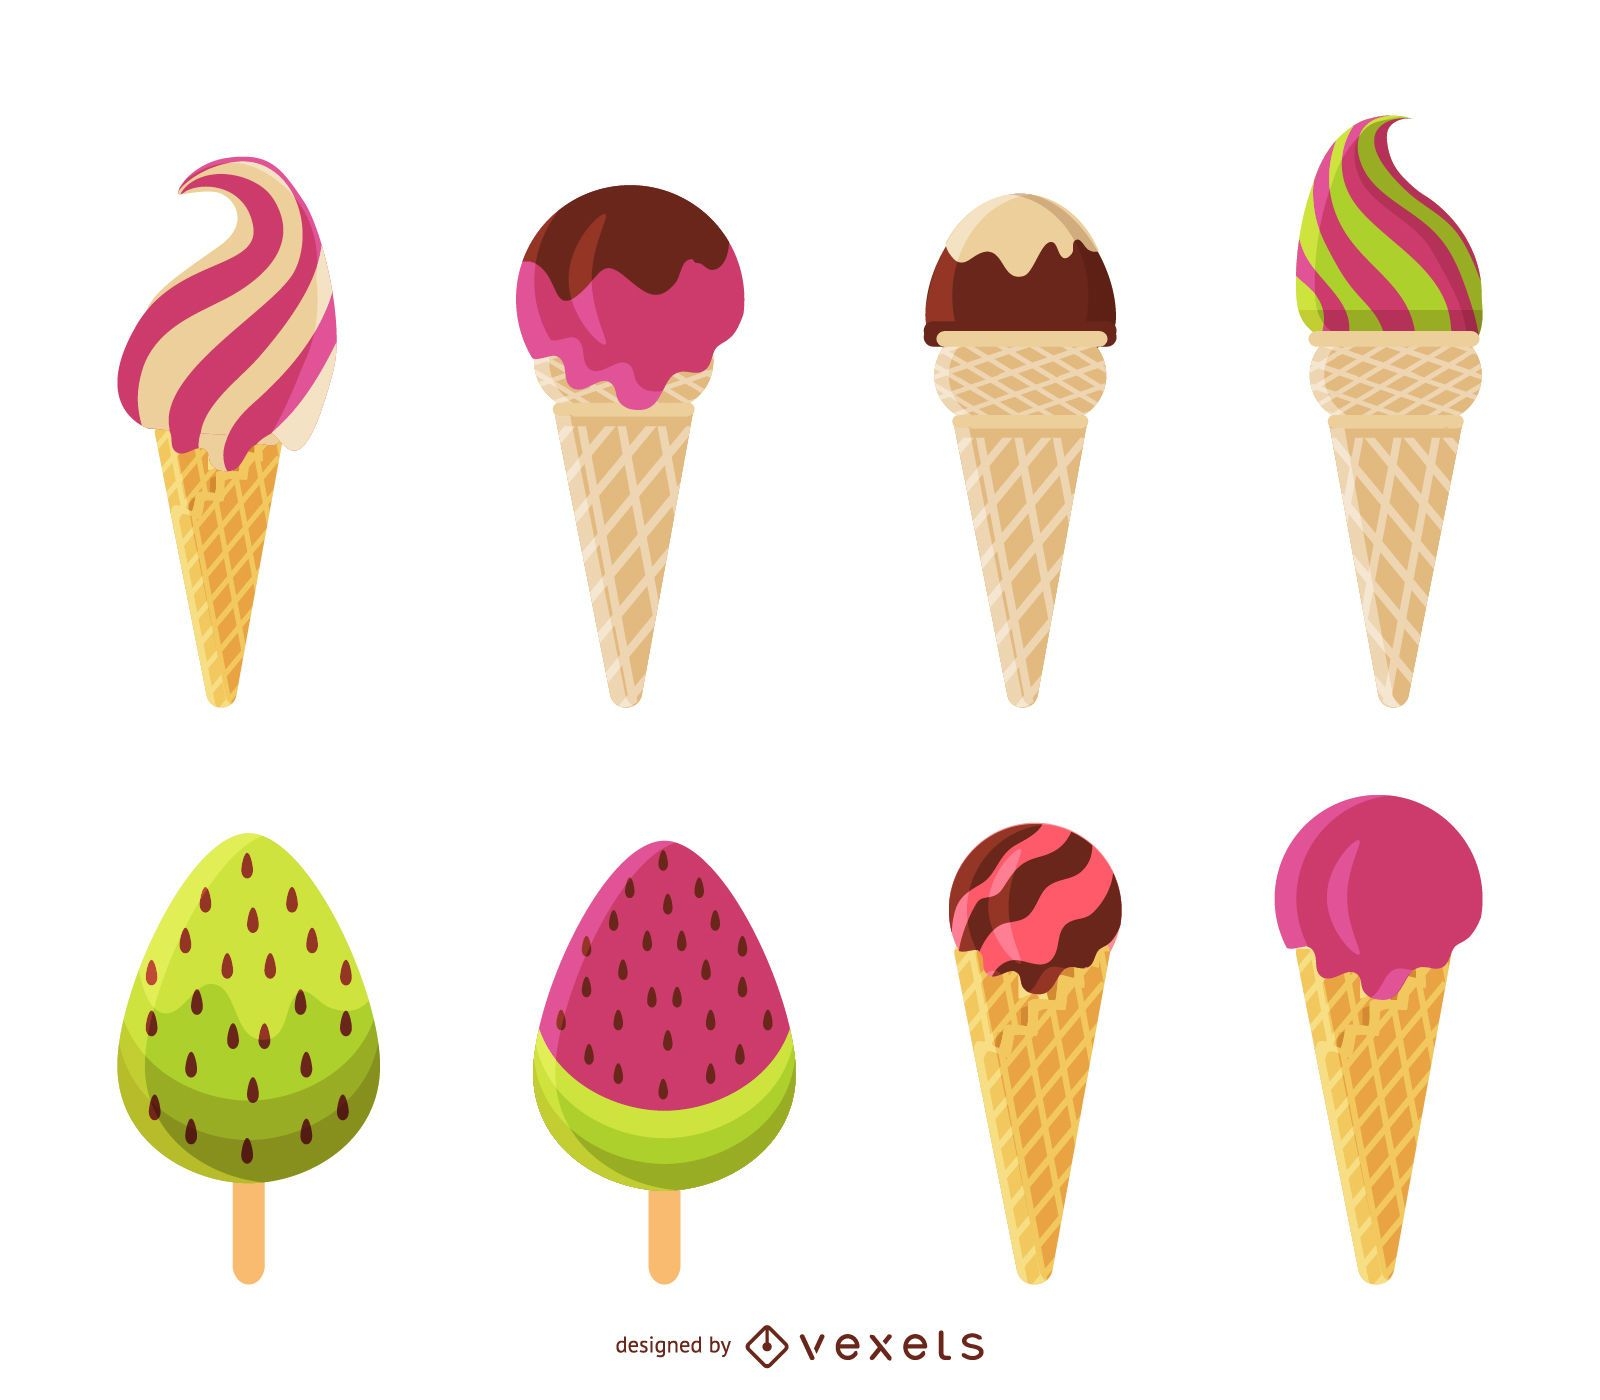 https://images.vexels.com/content/150621/preview/flat-ice-cream-illustration-set-353bf3.png